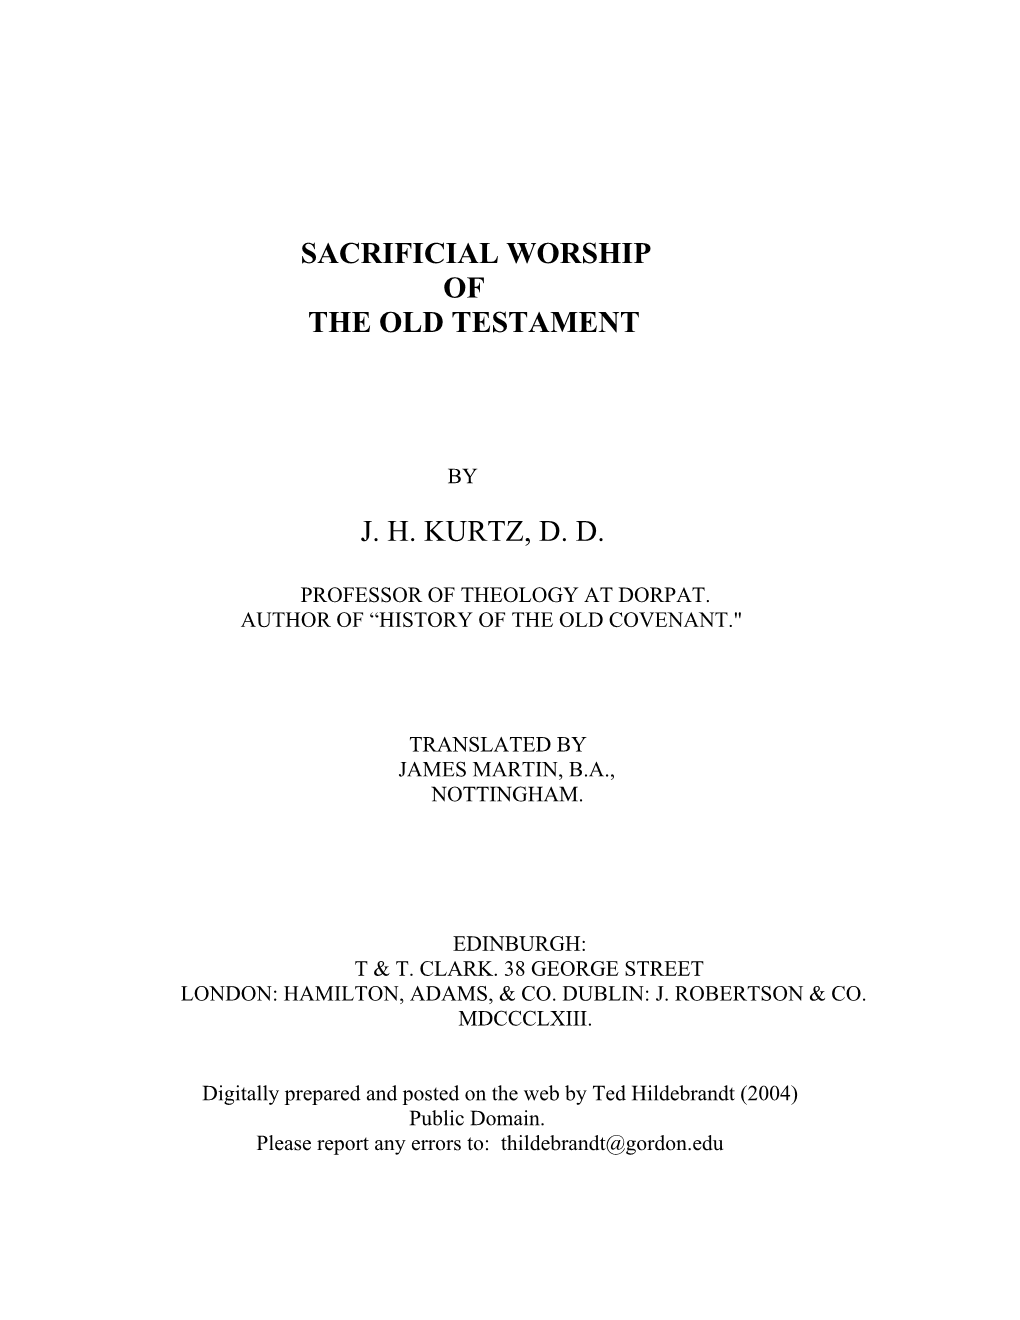 Sacrificial Worship of the Old Testament